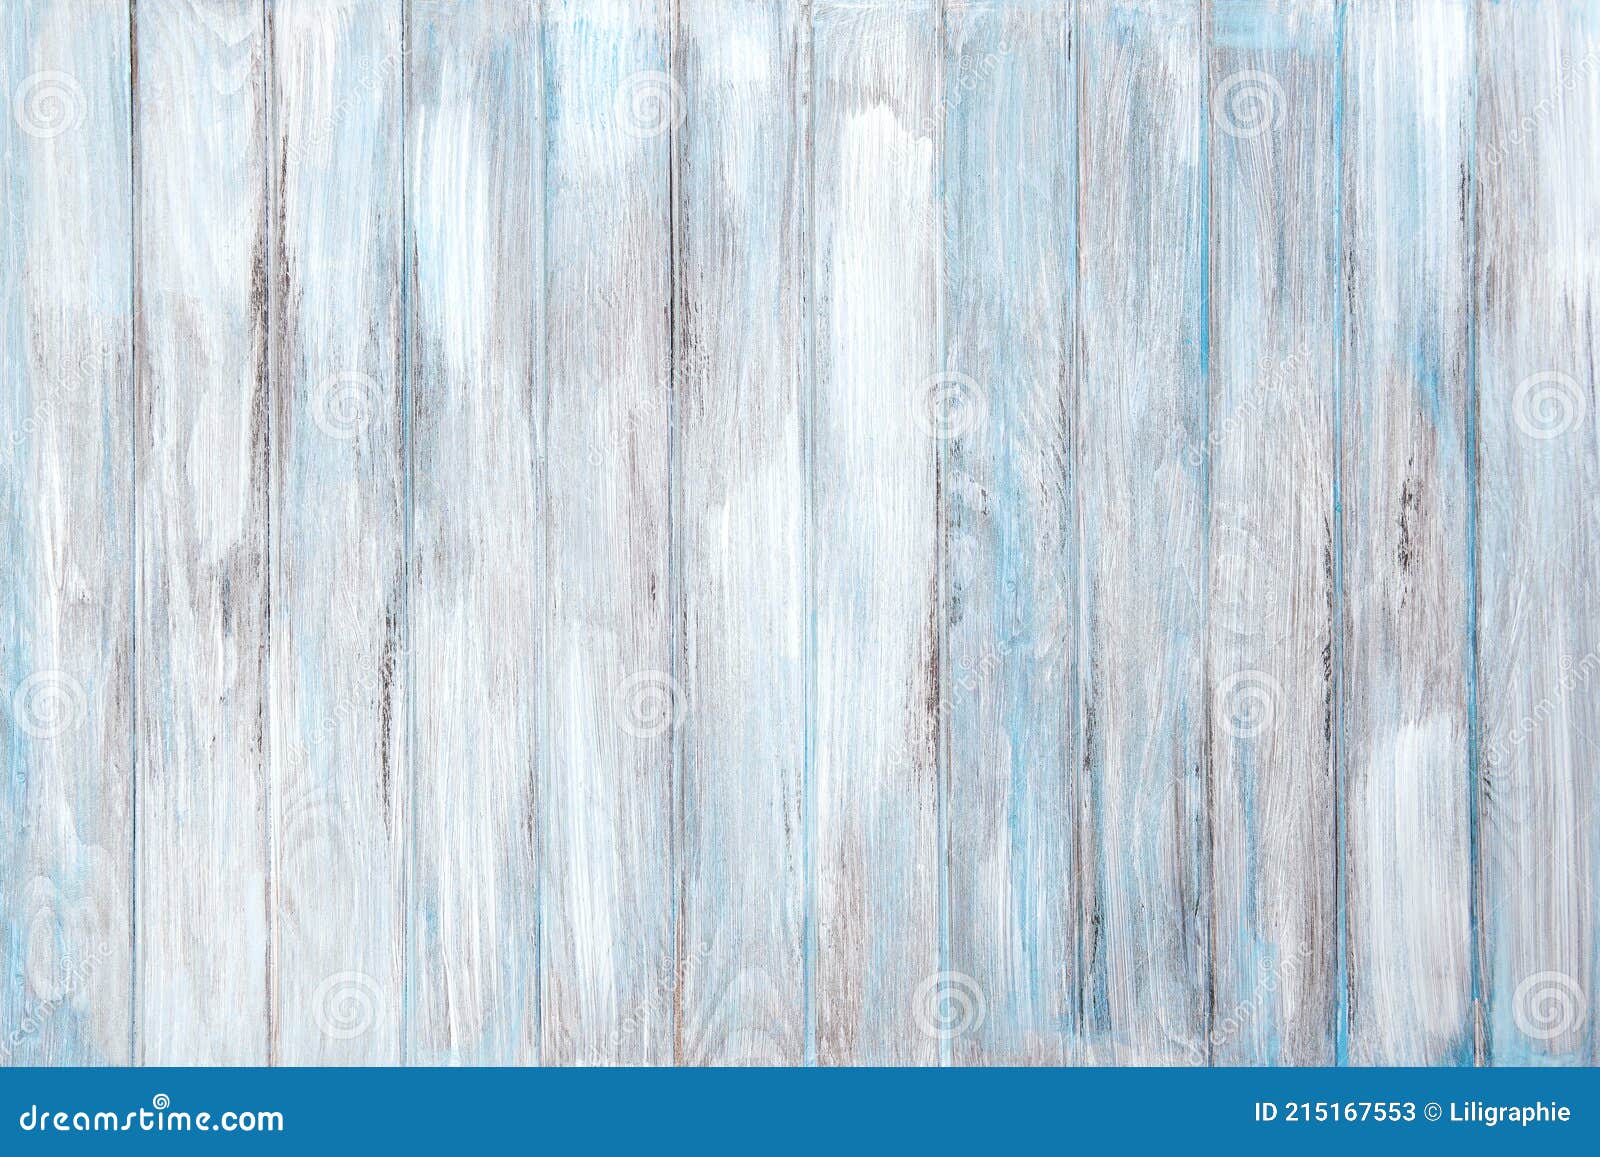 Blue White Wooden Background Natural Rustic Wood Texture Stock Image